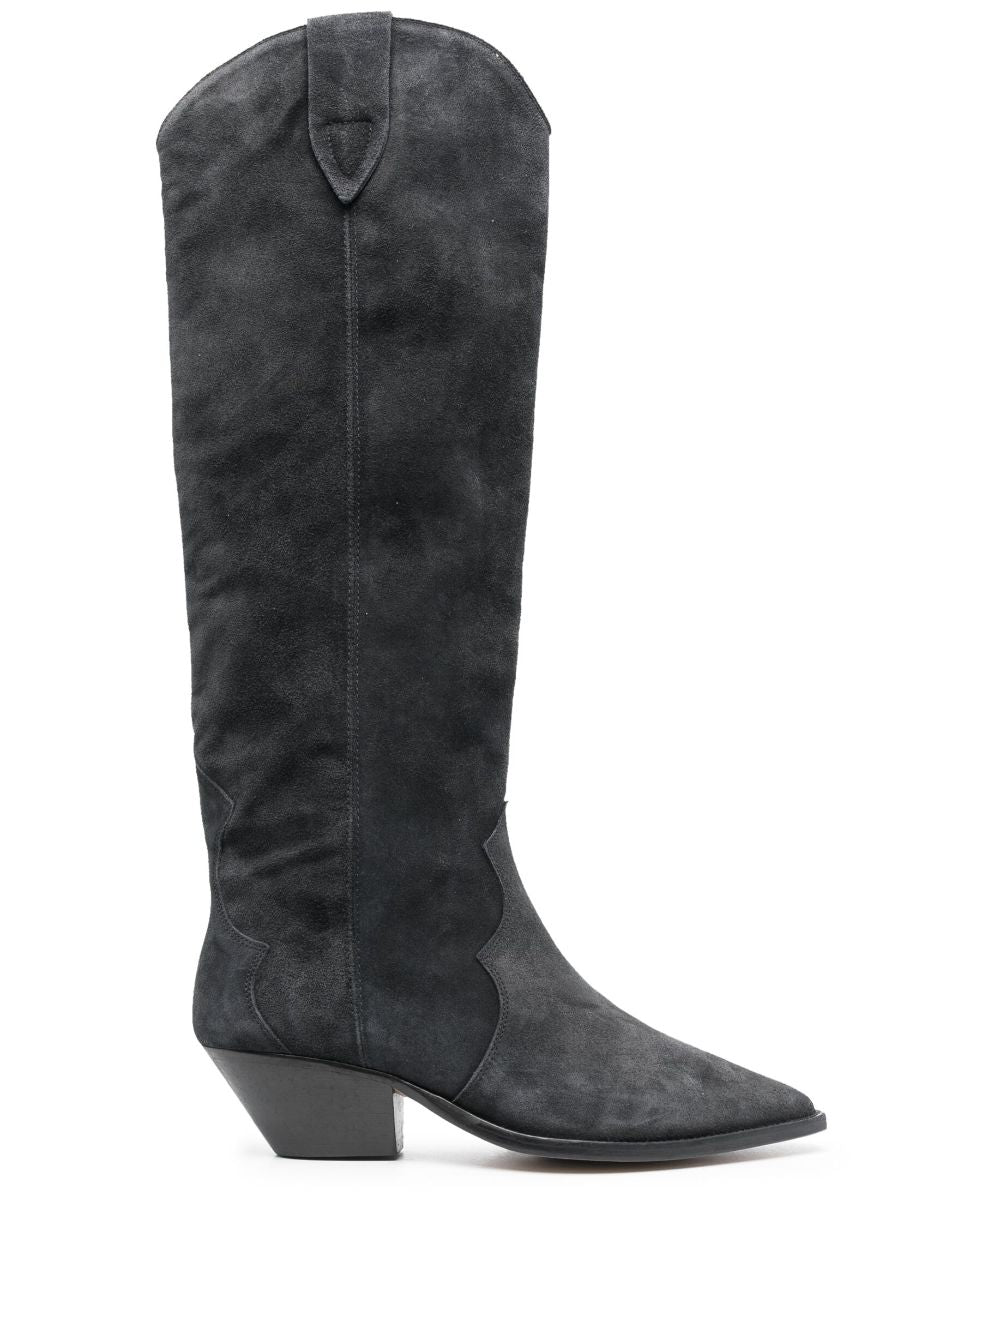 ISABEL MARANT Black Suede Knee-High Boots with Mid Sculpted Heel for Women